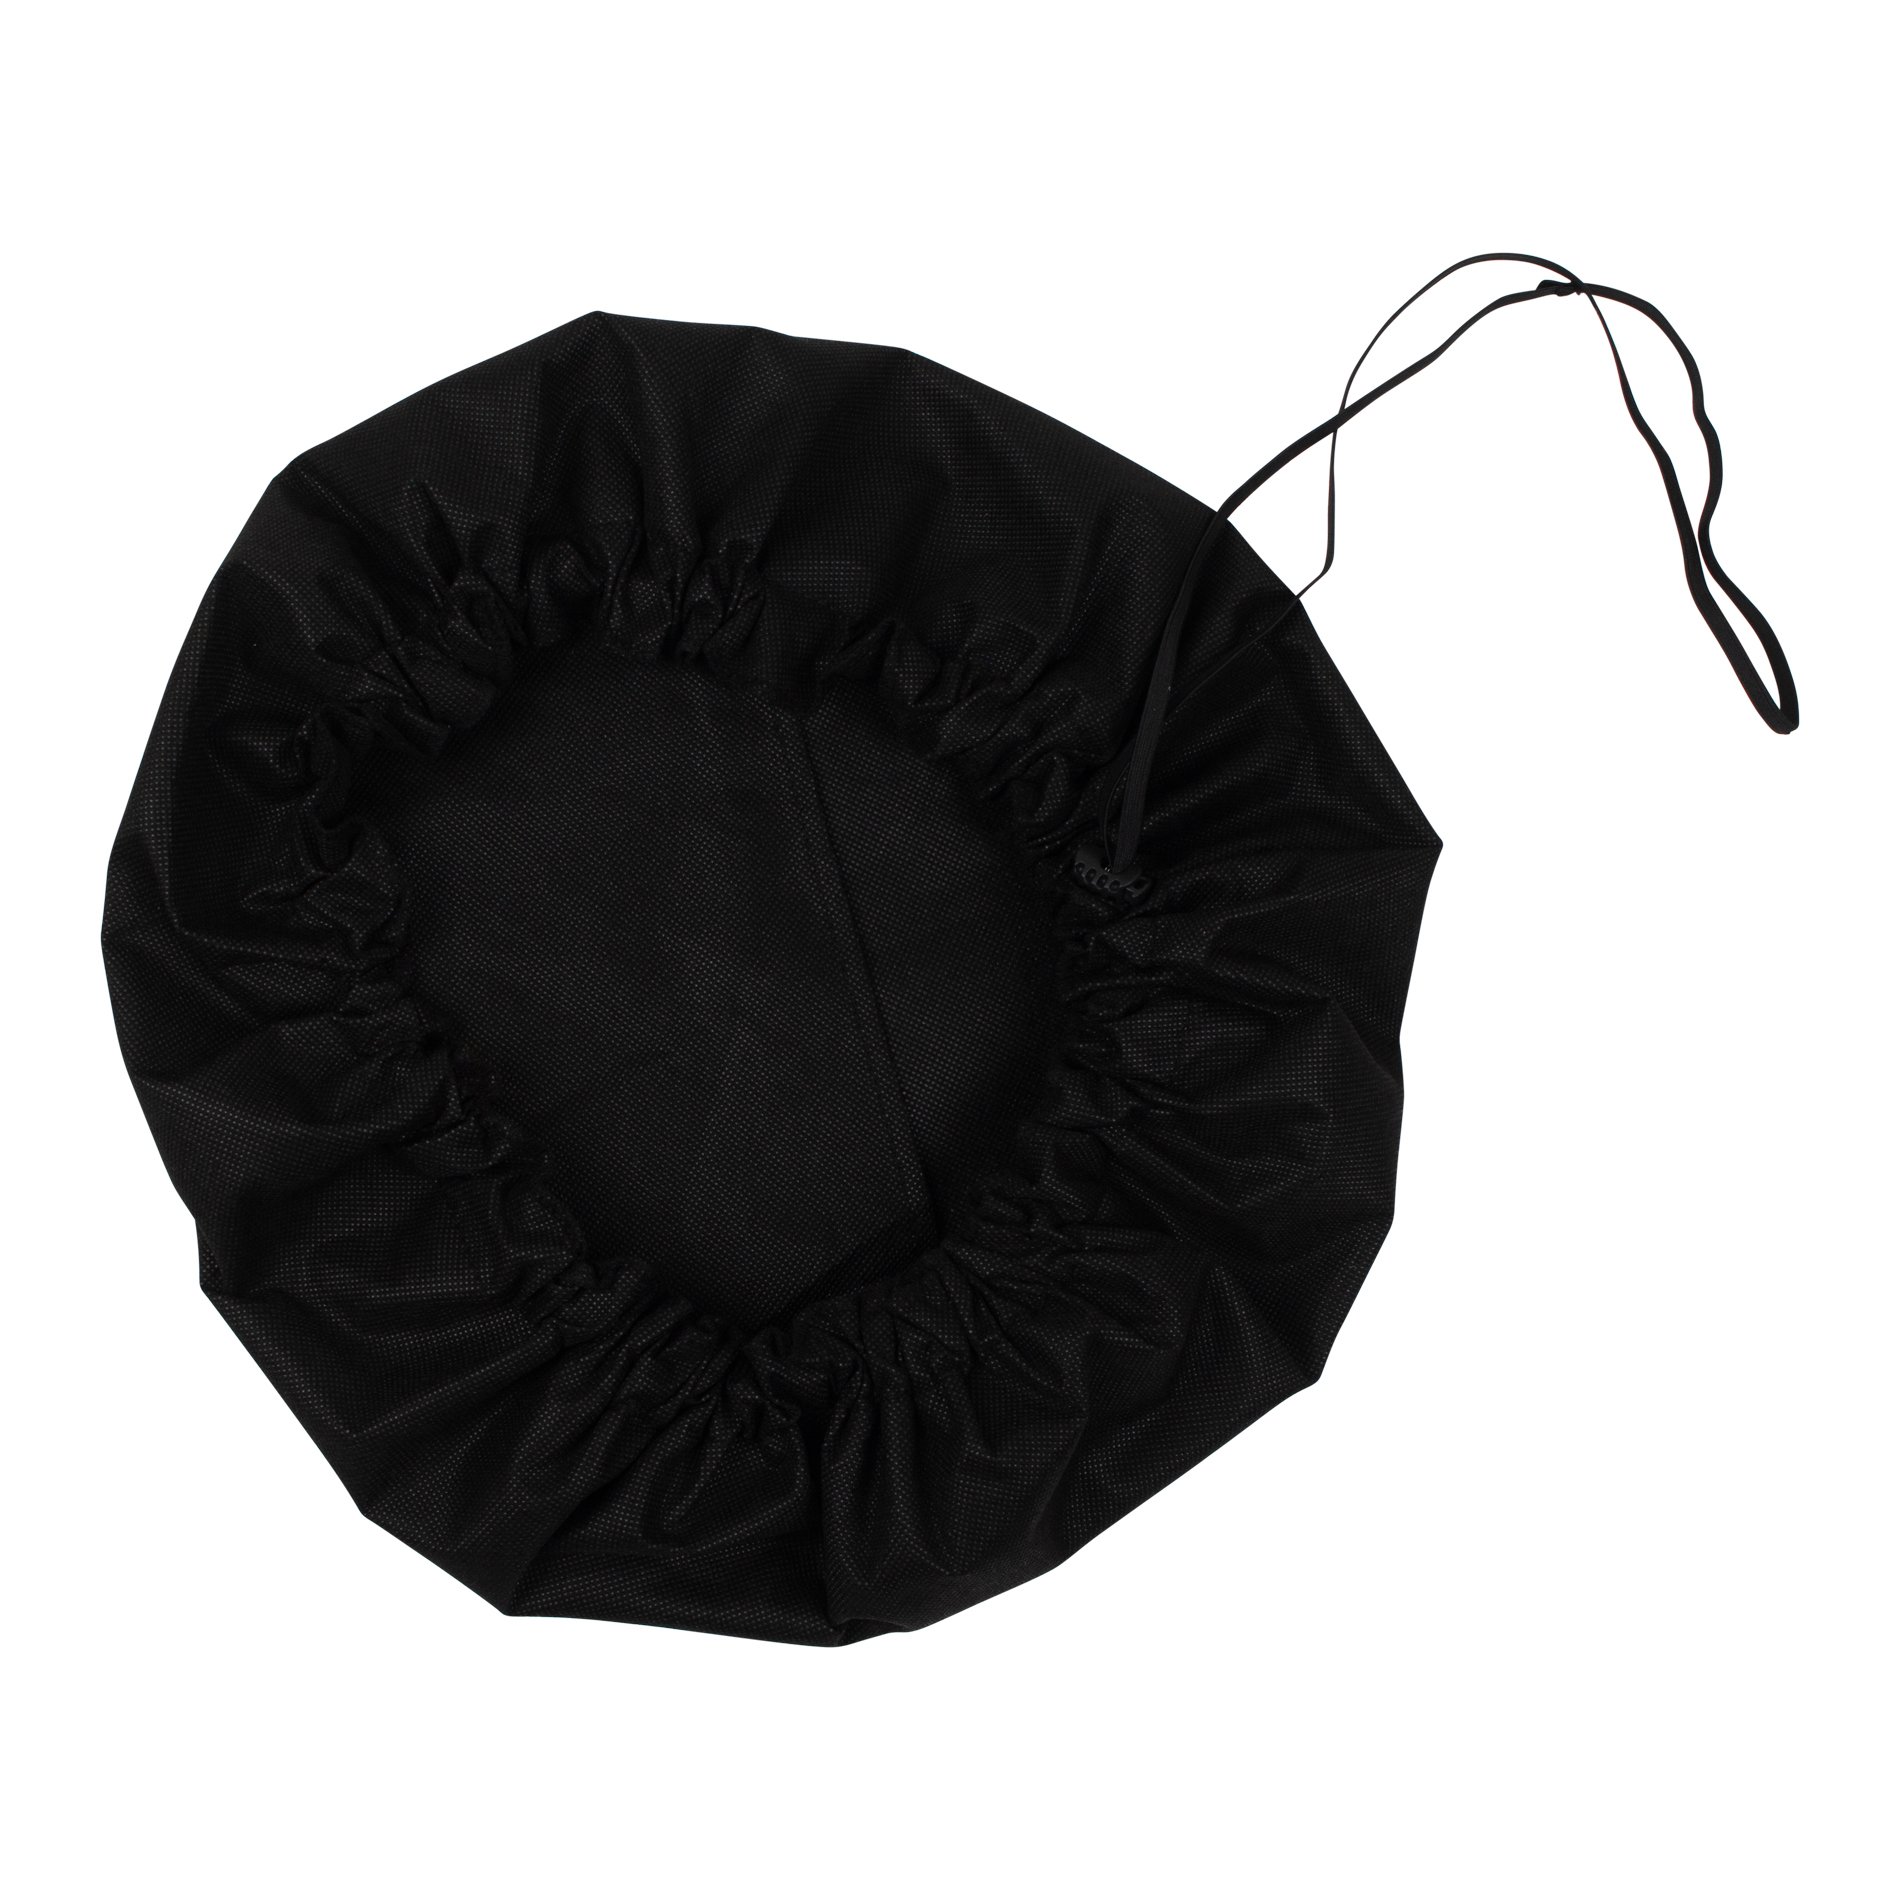 Black Bell Cover with MERV 13 filter, 24-26 Inches-GBELLCVR2426BK